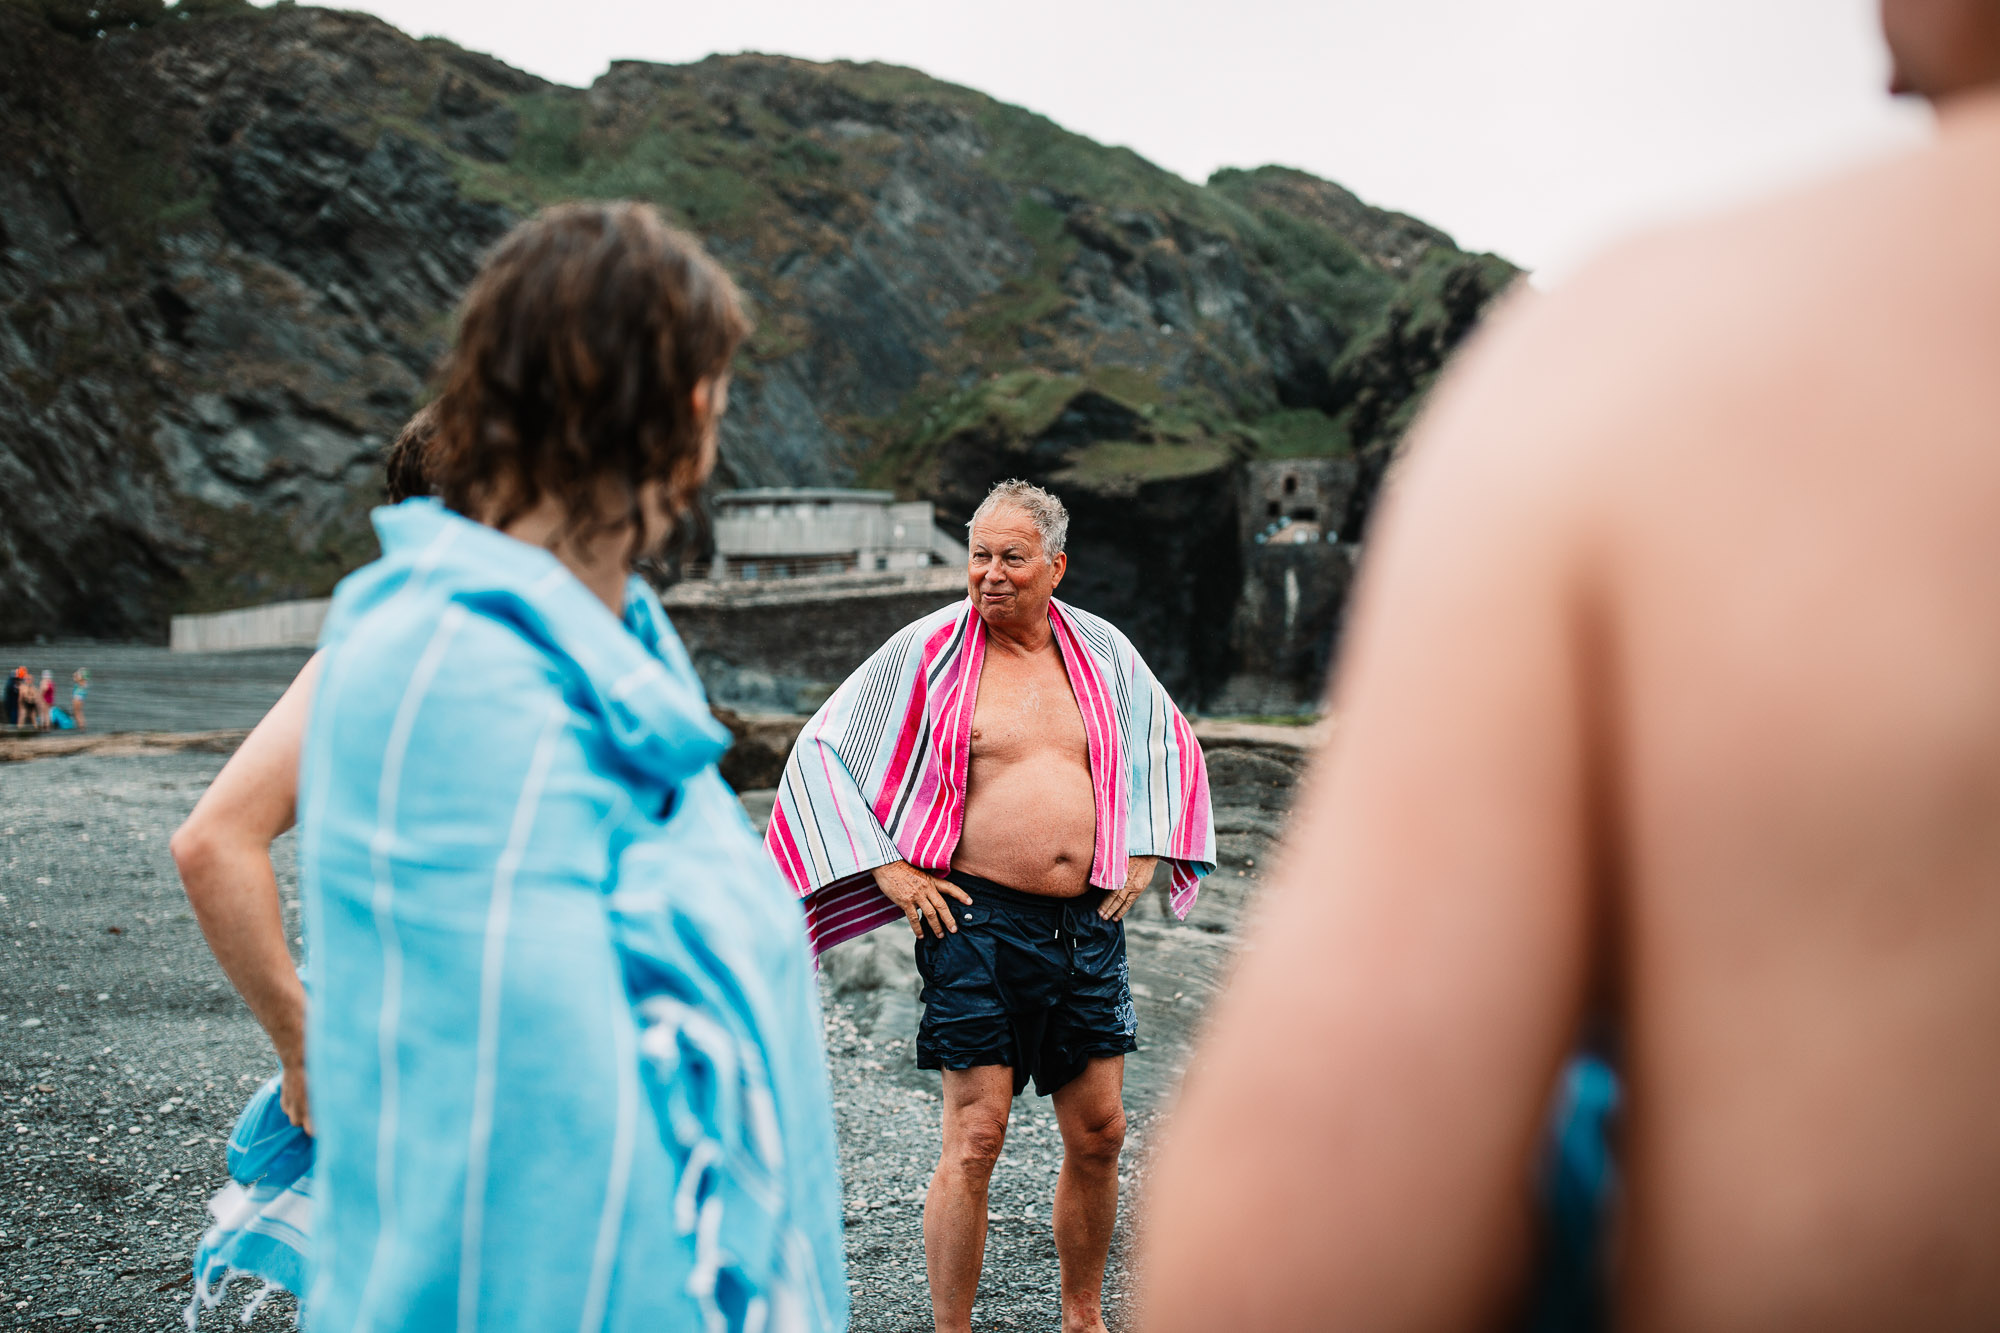 father of the groom in a towel after a swim at tunnels beaches